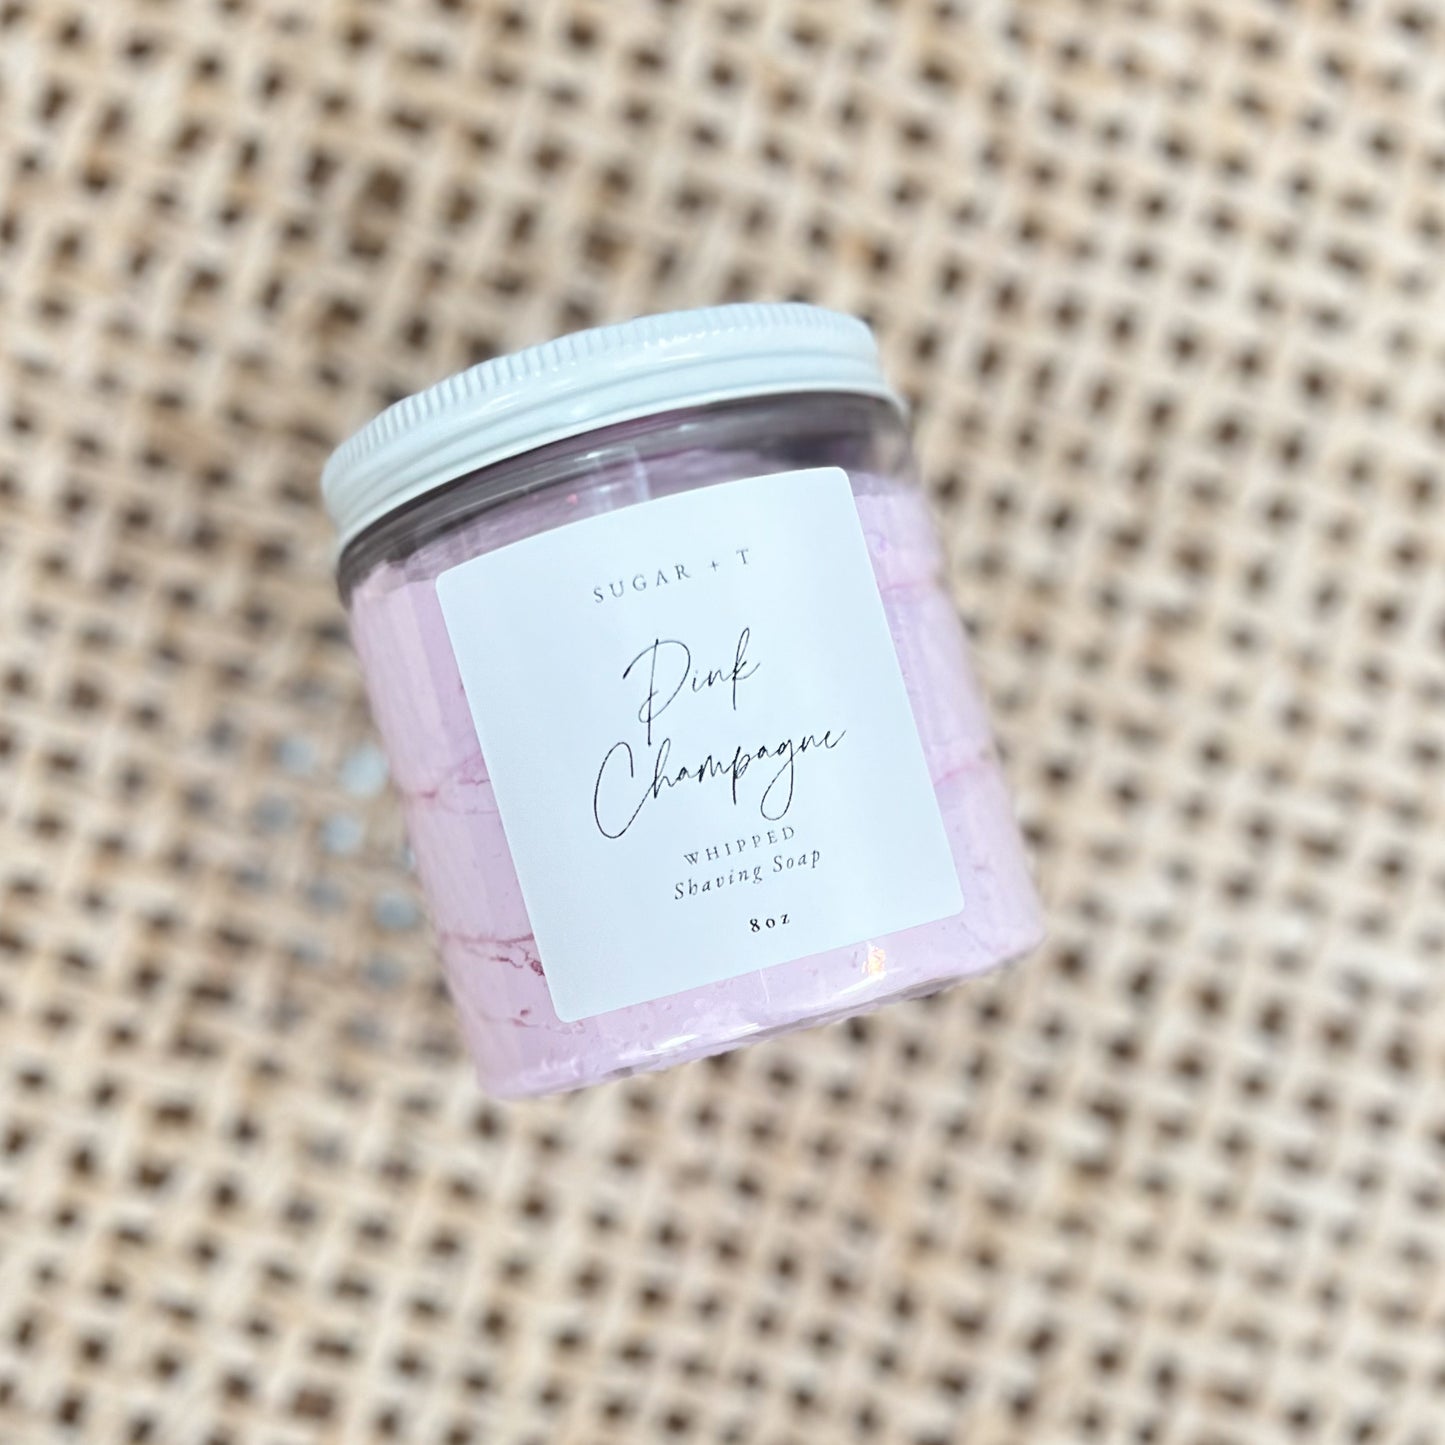 Pink Champagne Whipped Soap